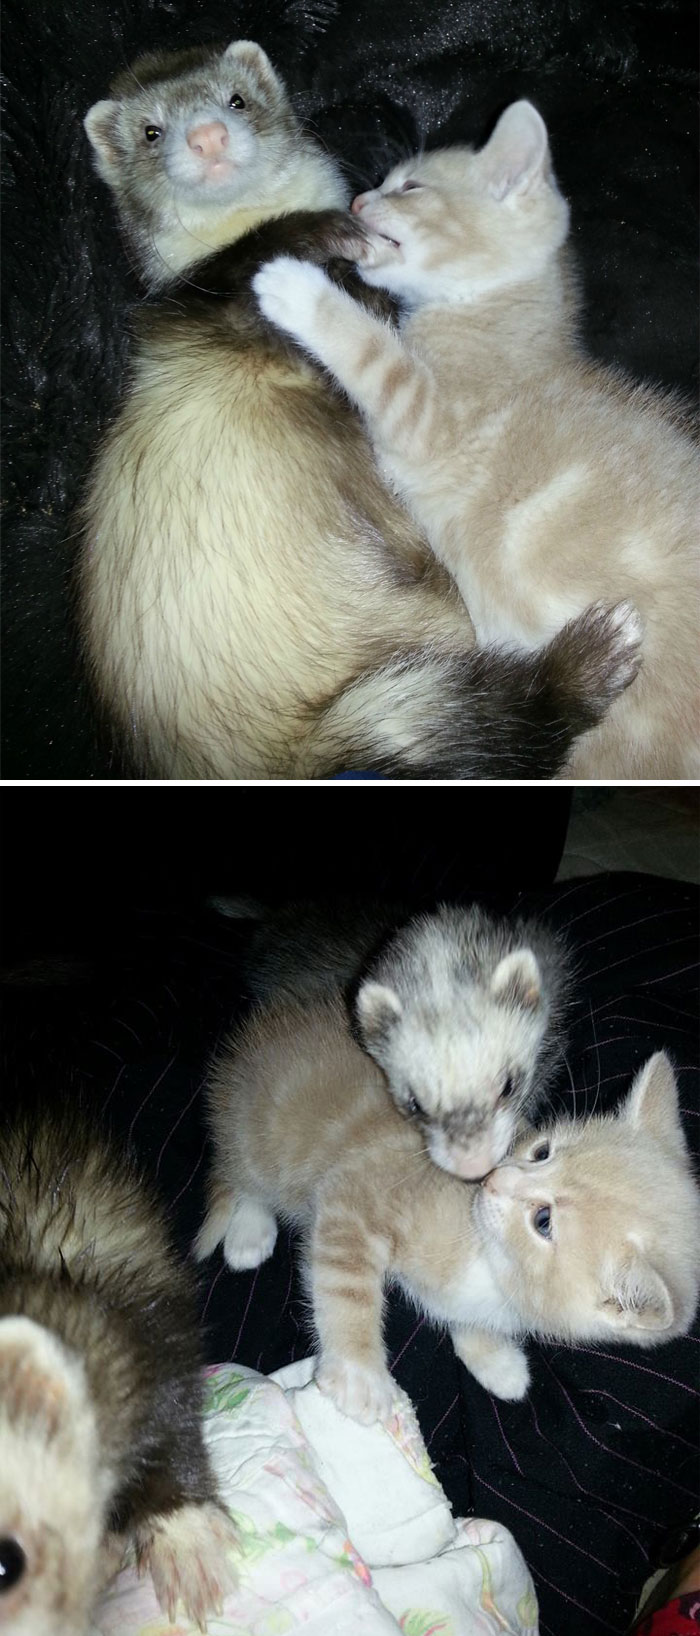 In Early June I Took Home A Kitten And Was Worried About Introducing Him To My Ferrets. Watch Him Grow Up With Them